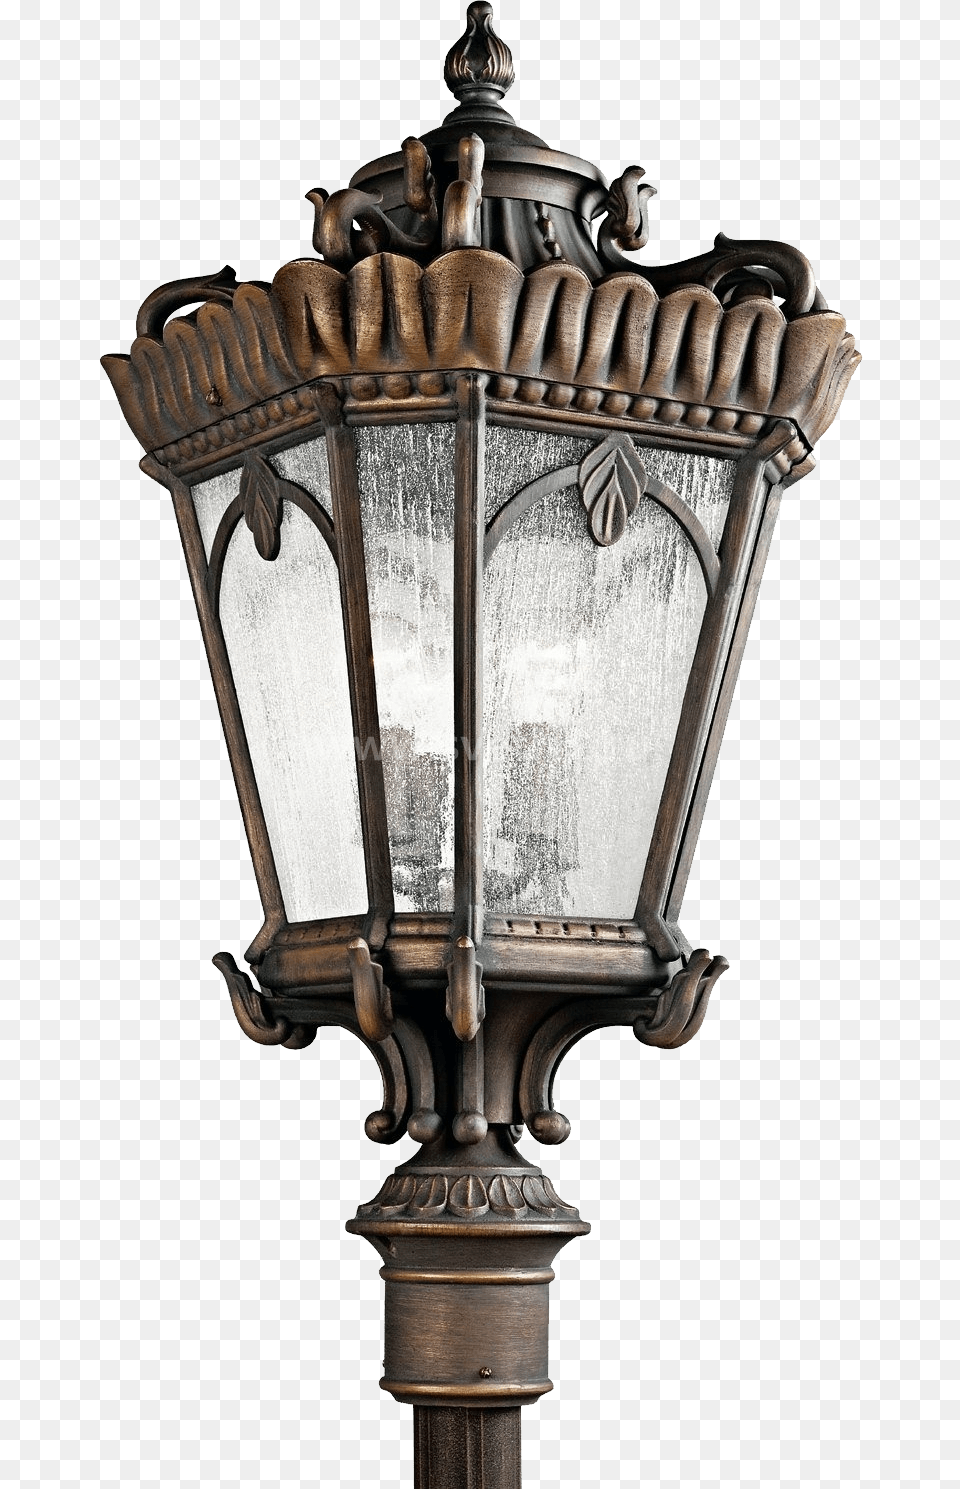 Antique Copper Streetlight, Lamp, Lampshade Png Image